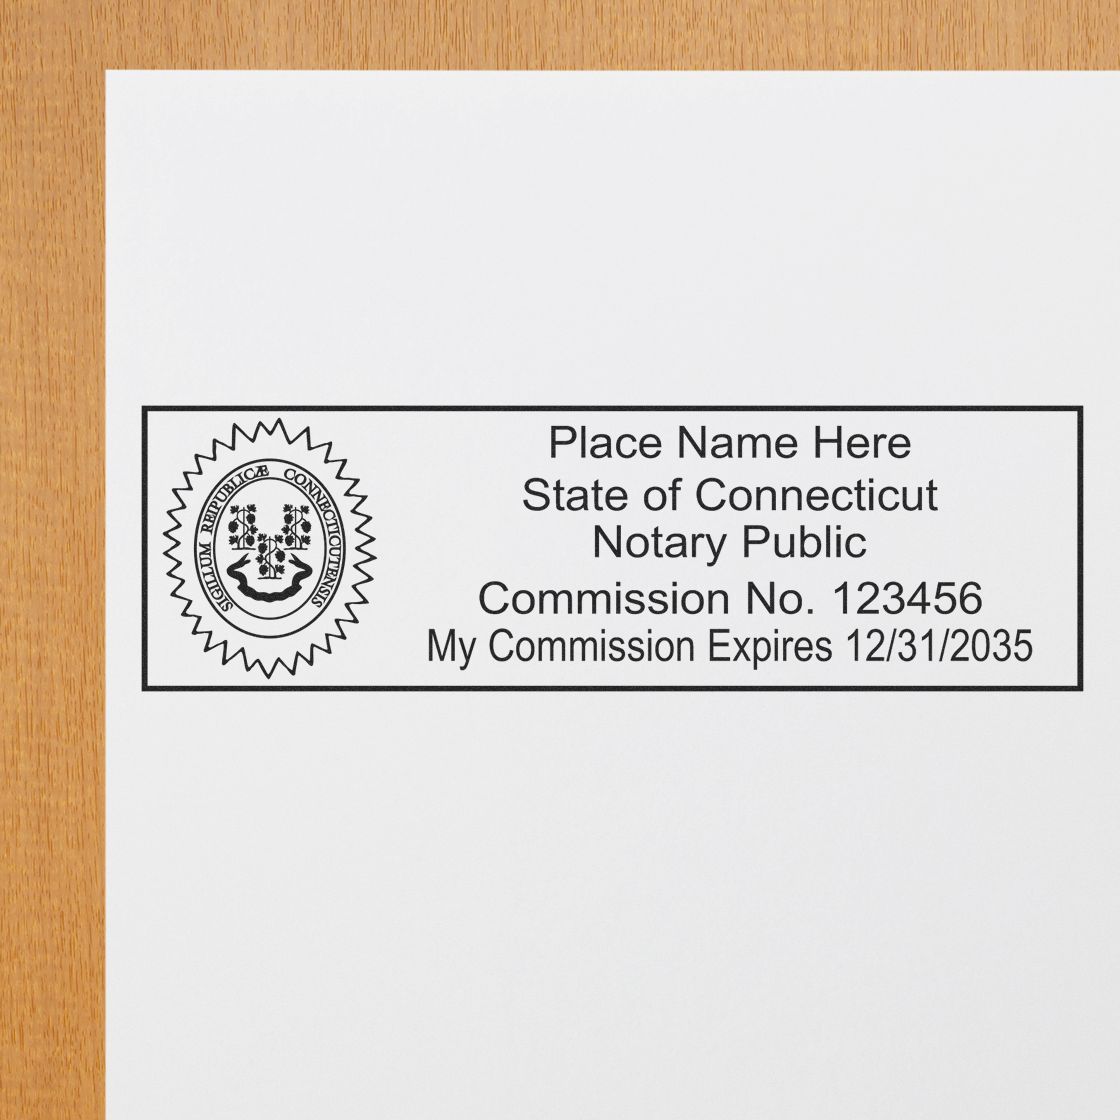 The main image for the MaxLight Premium Pre-Inked Connecticut State Seal Notarial Stamp depicting a sample of the imprint and electronic files